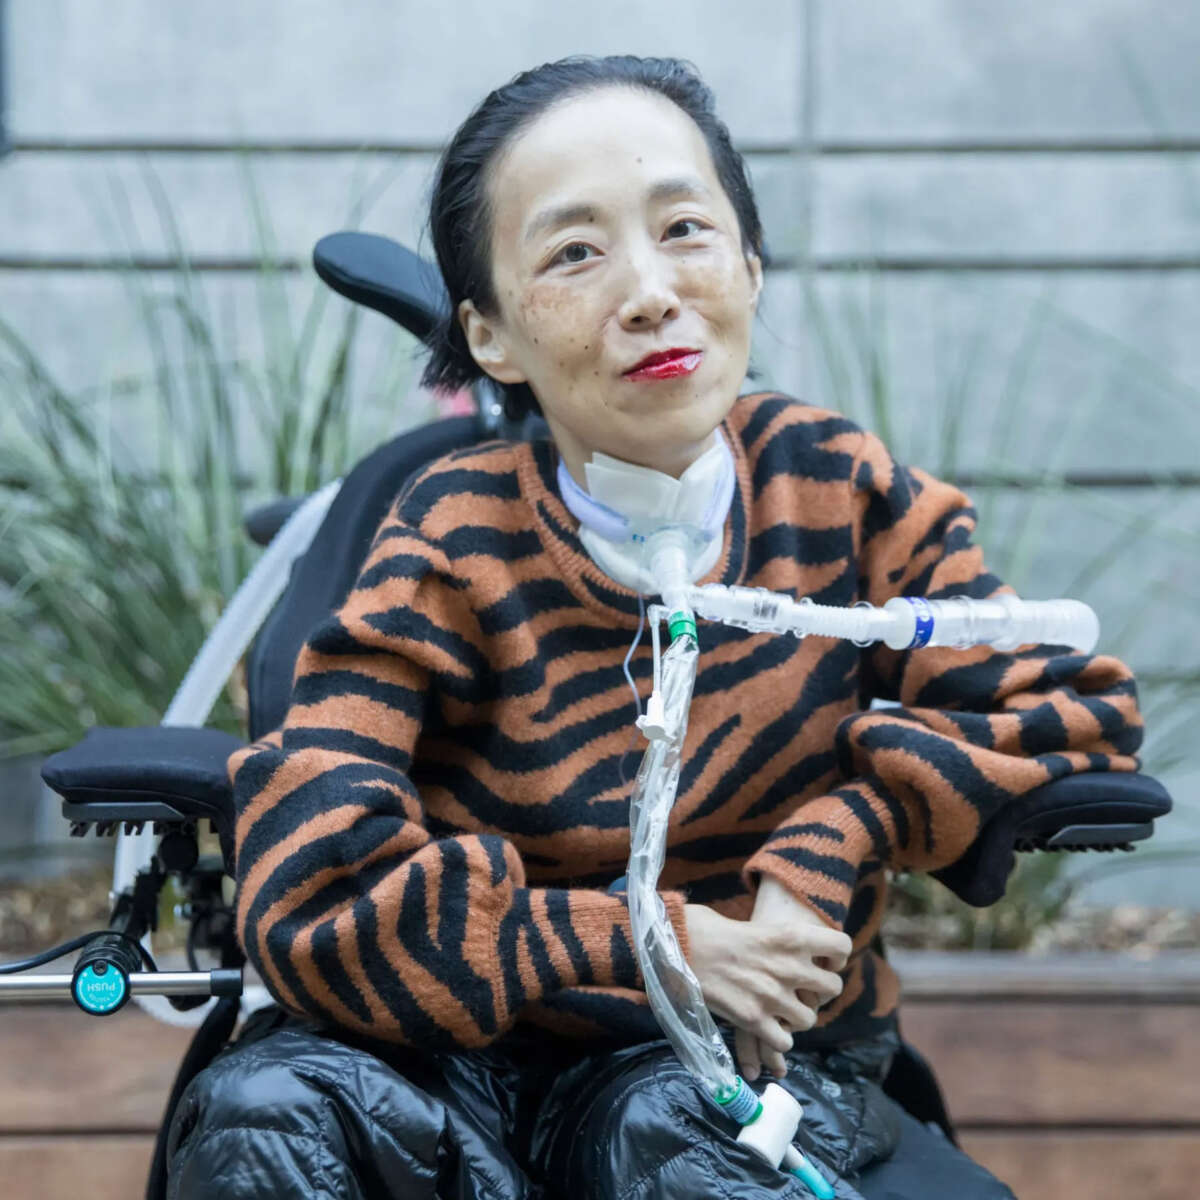 Image description: Photo of Alice Wong, an Asian American disabled woman in a power chair. She is wearing an orange and black tiger-striped sweater, black pants, a bold red lip color, and a trach at her neck. In the background is a gray cement wall with greenery.